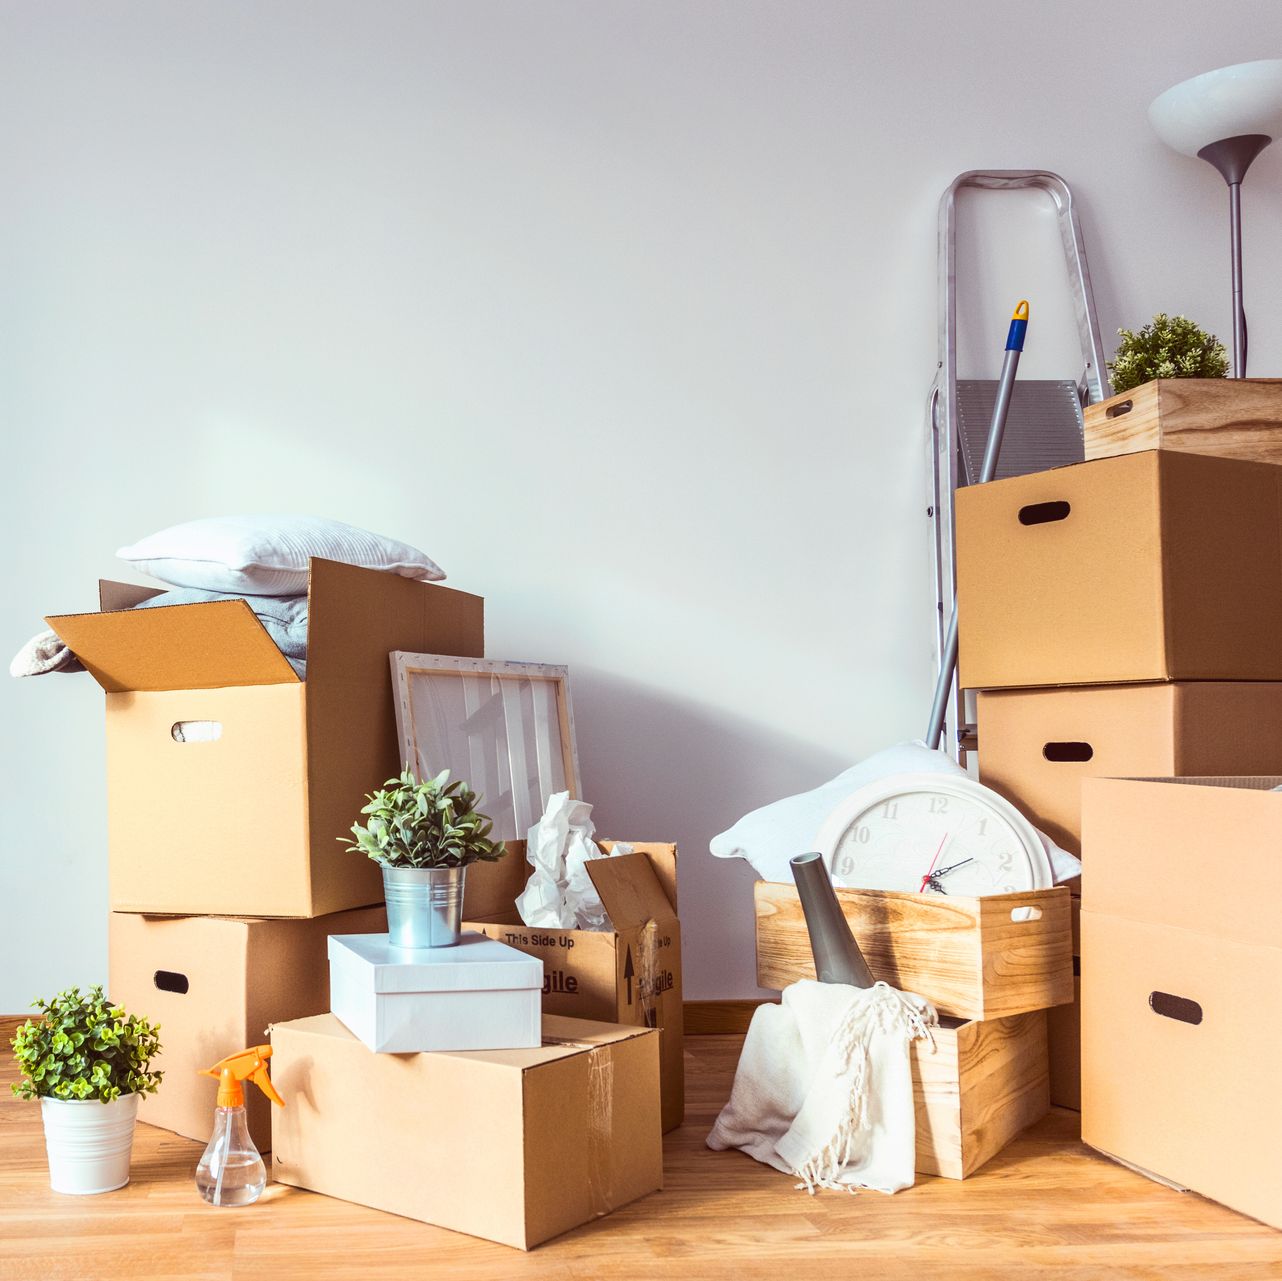 How To Pack For Moving House: From Packing Boxes To Valuables